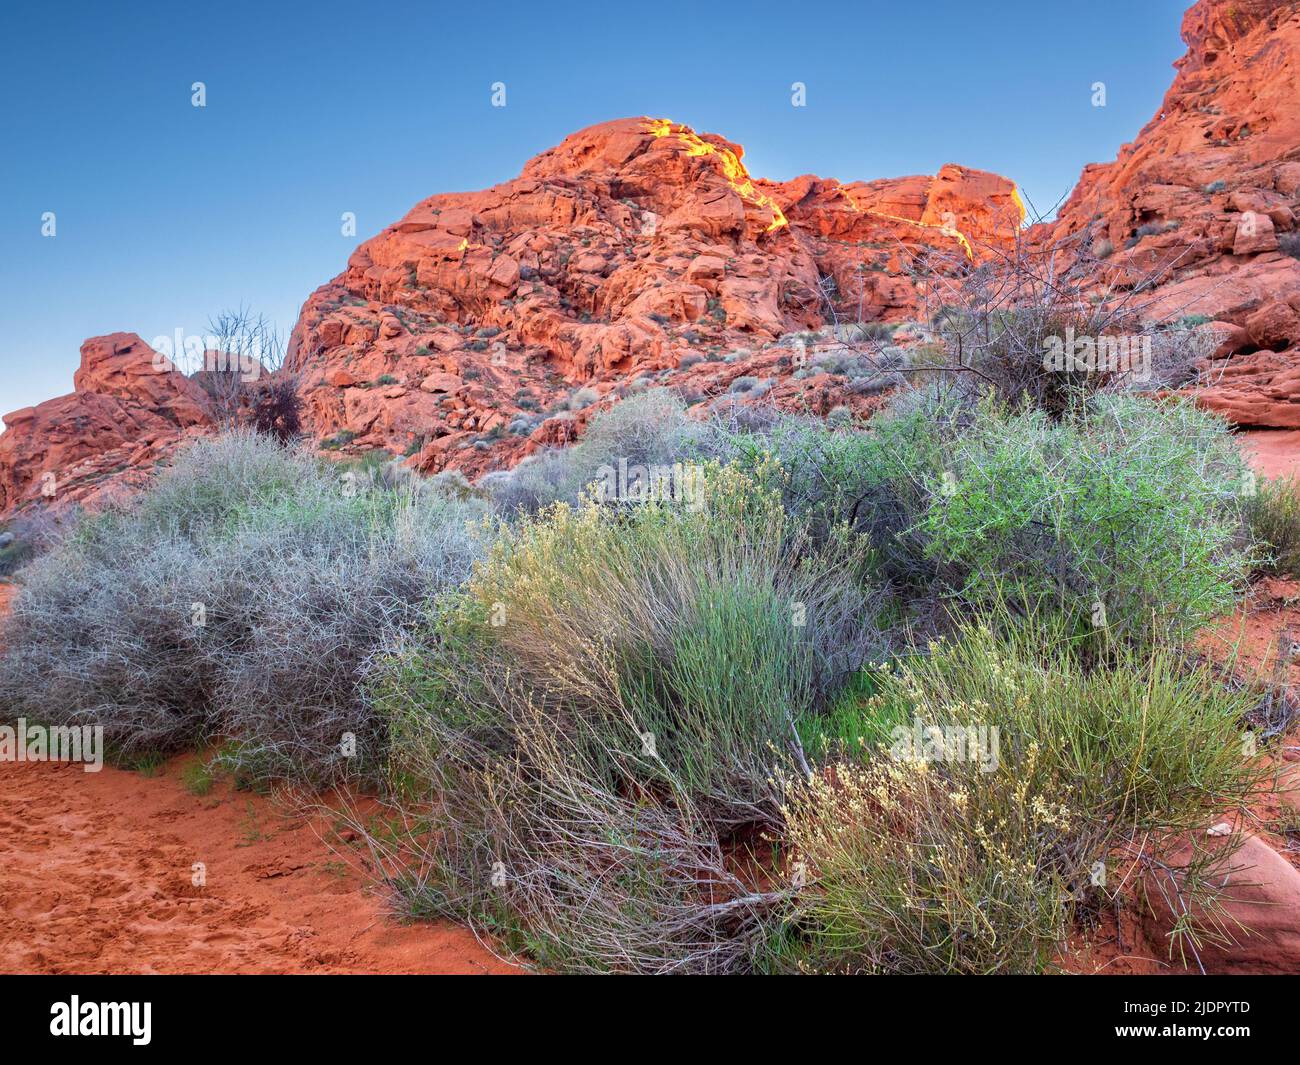 Desert scrub brush in winter amid the red rocks of Petroglyph Canyon, Valley of Fire State Park in the Mojave Desert, Nevada Stock Photo